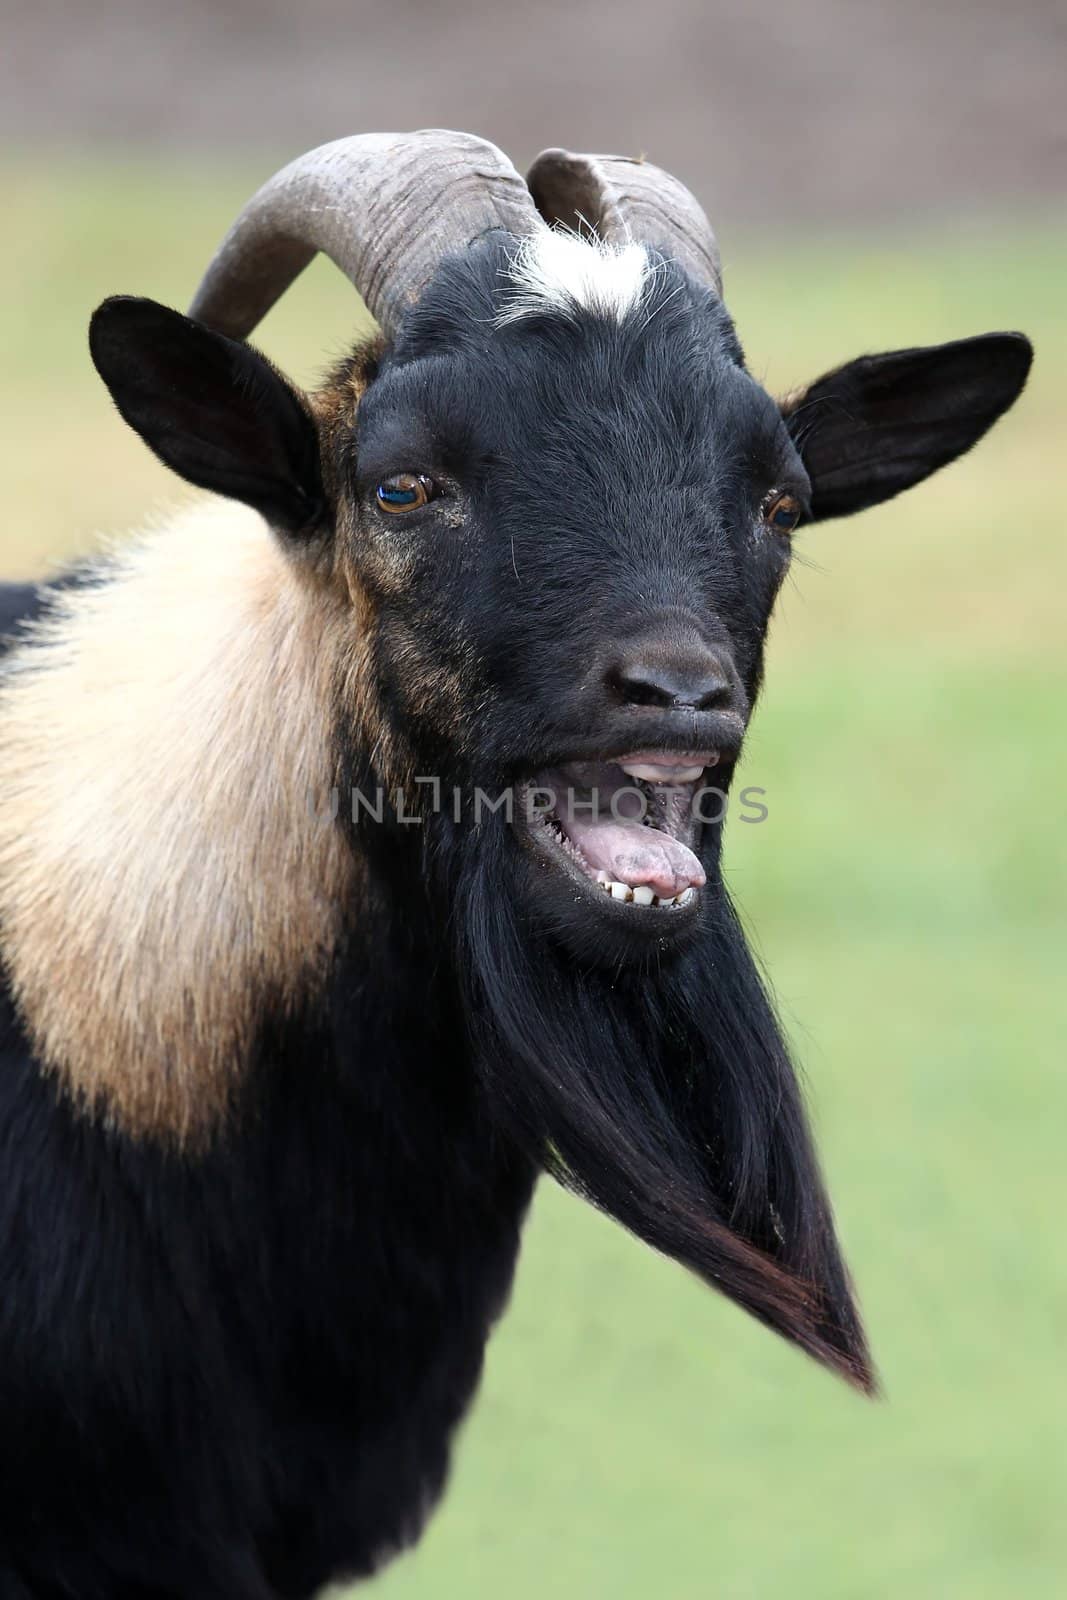 Billy goat or male goat with long beard bleating with it's mouth wide open